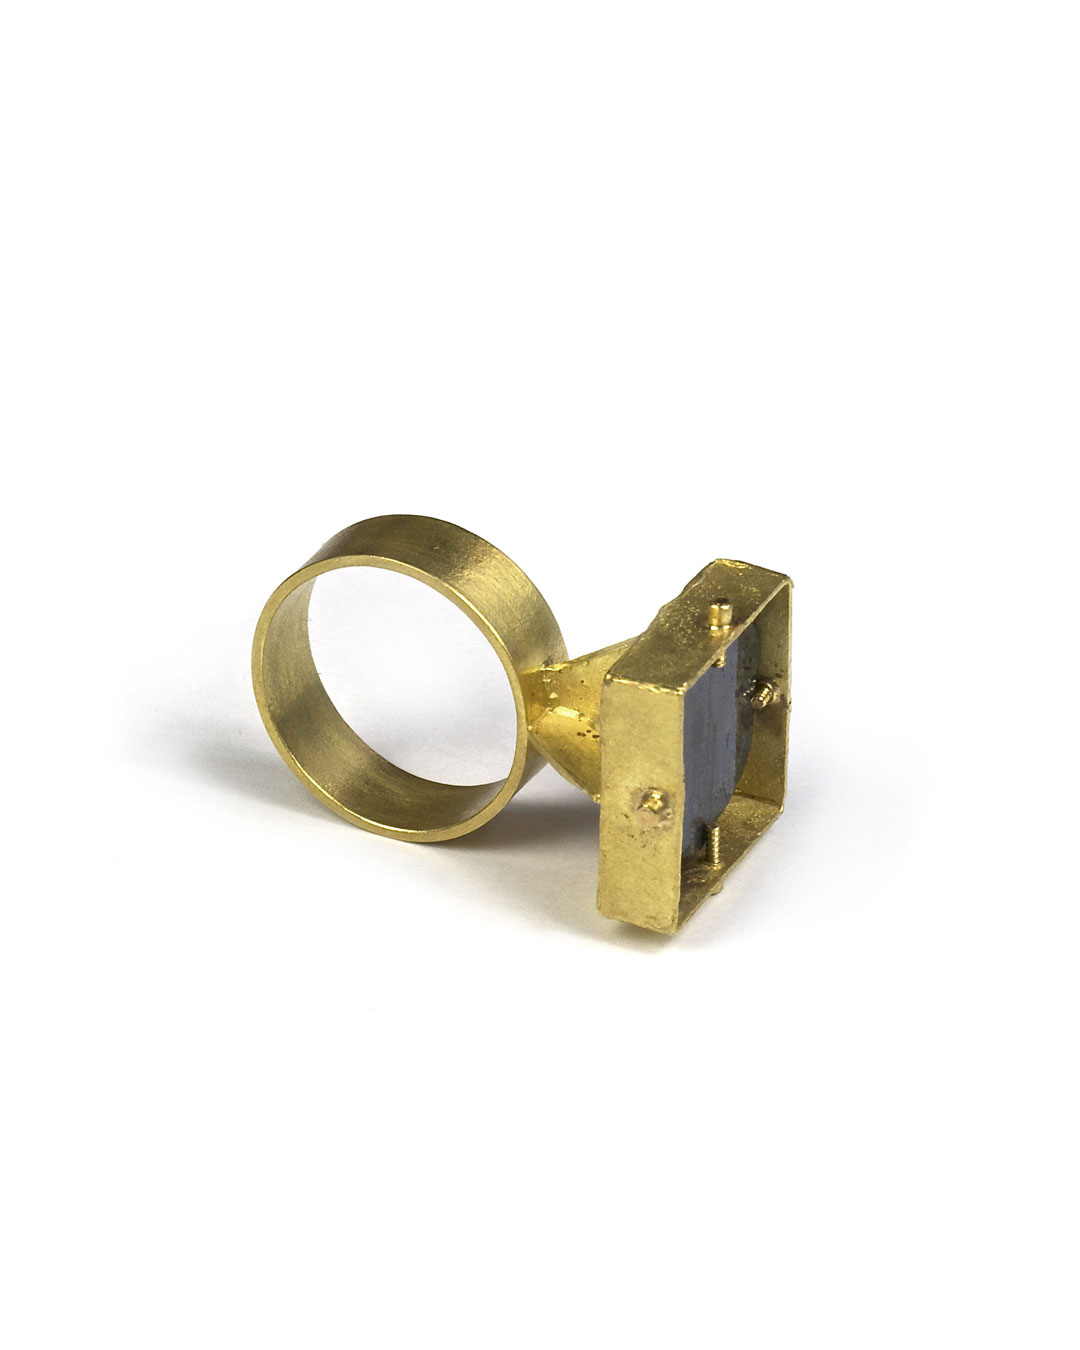 Andrea Wippermann, untitled, 2007, ring; 18ct gold, sapphire, 32 x 20 x 19 mm, €2550